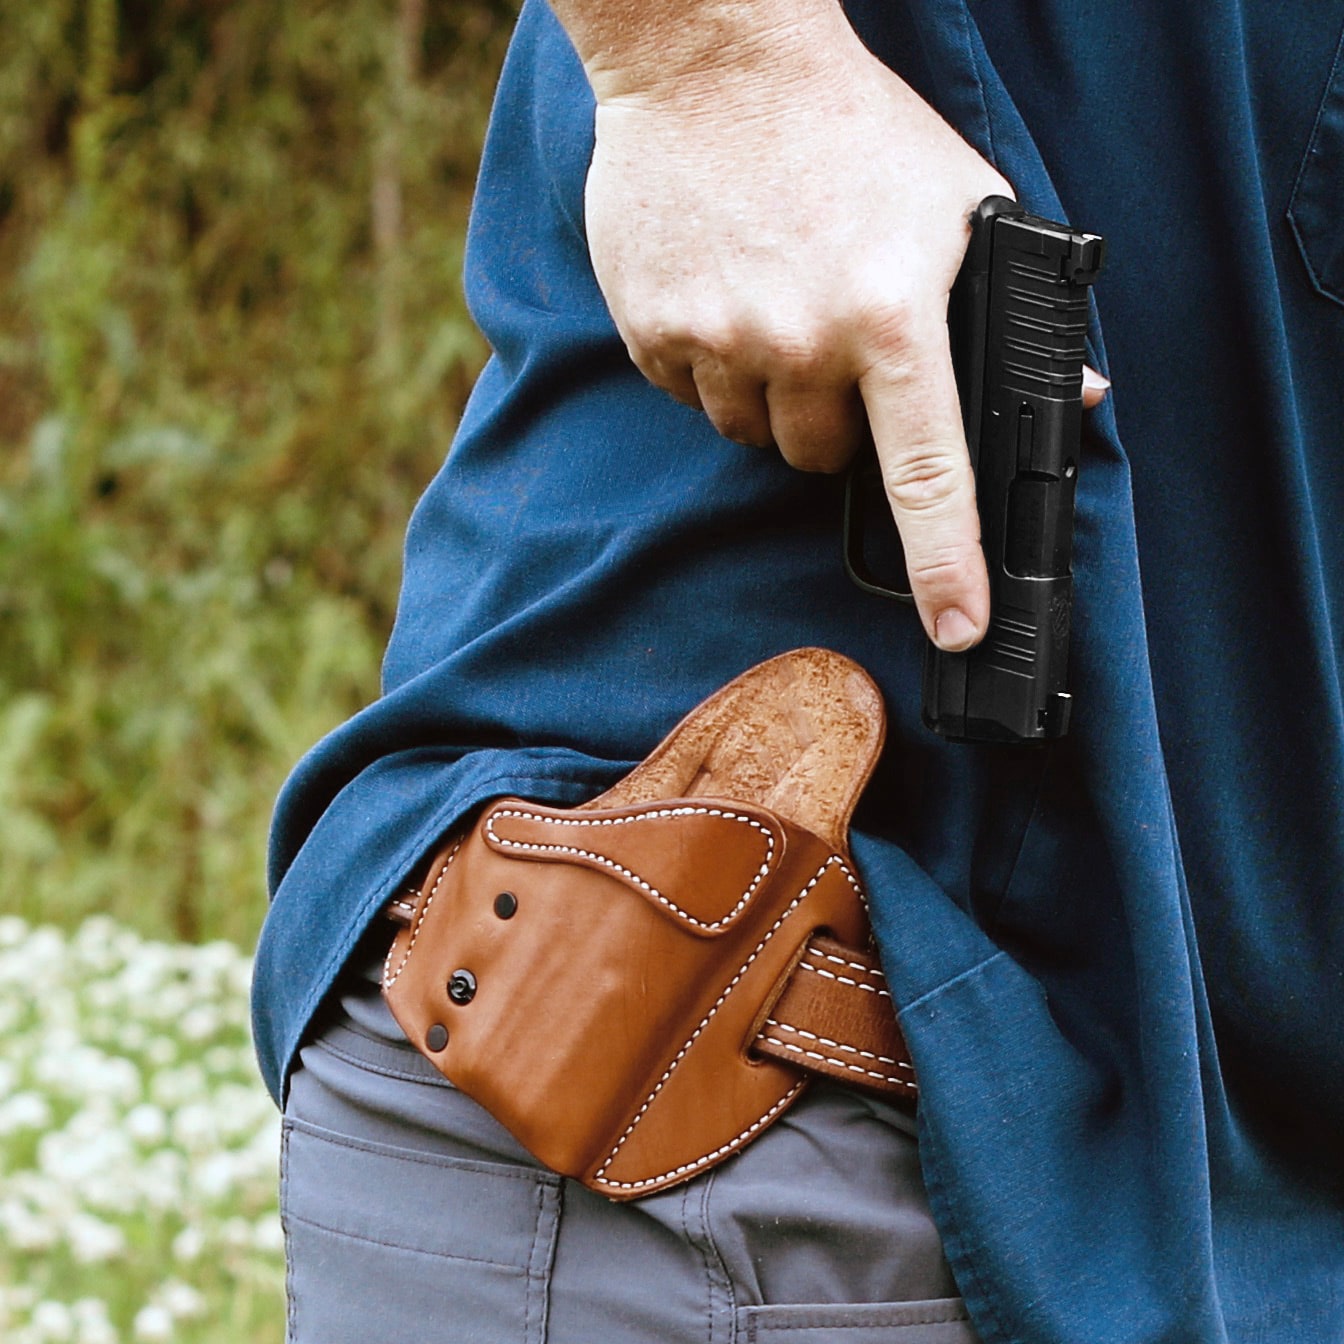 Man holding pistol while using an Urban Carry concealment holster